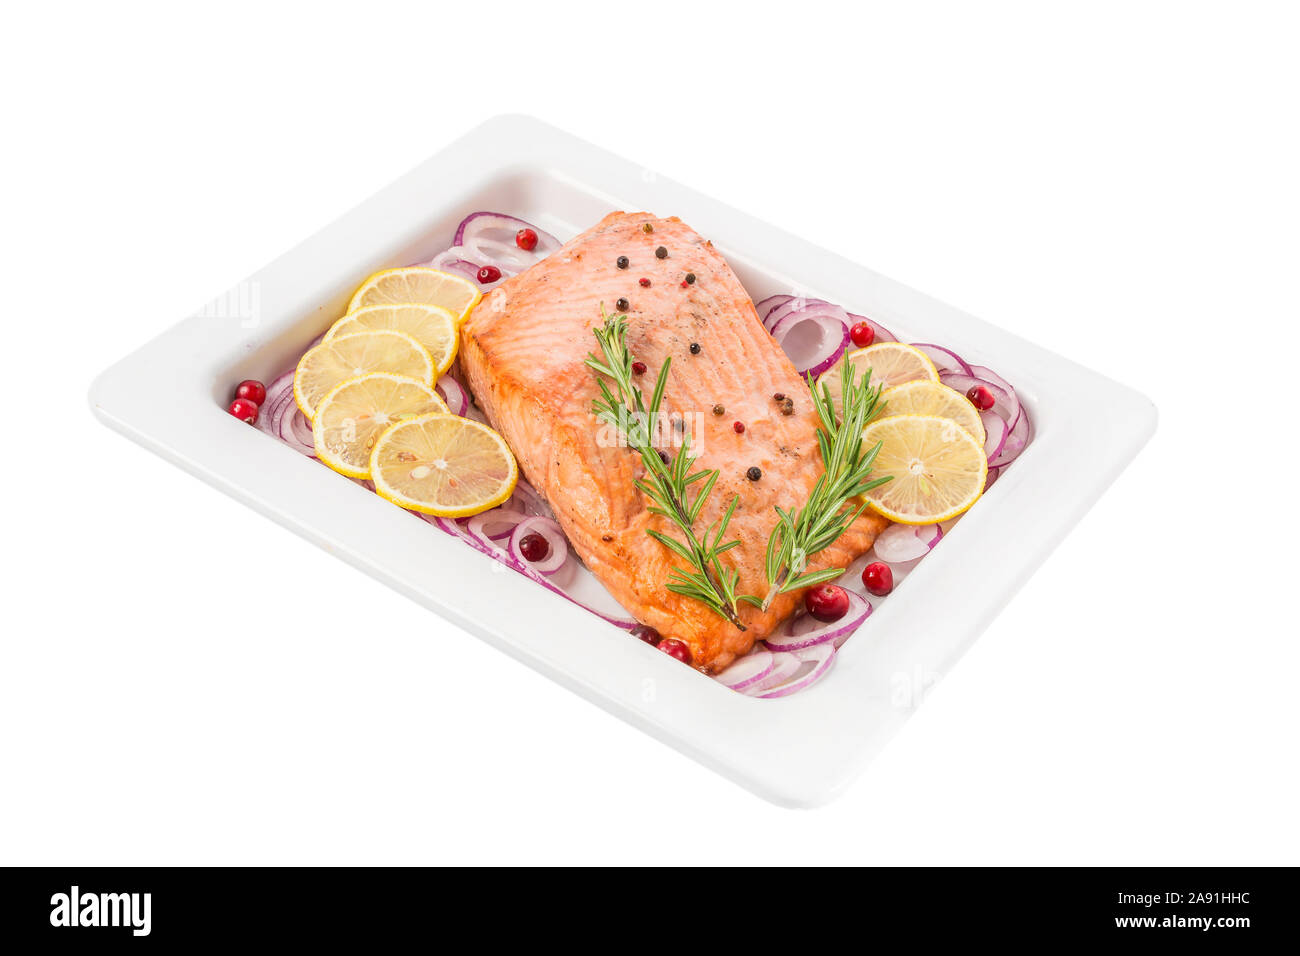 Salmon fillet with rosemary, onion and lemon in a plate isolated on white background. close up. healthy diet food Stock Photo